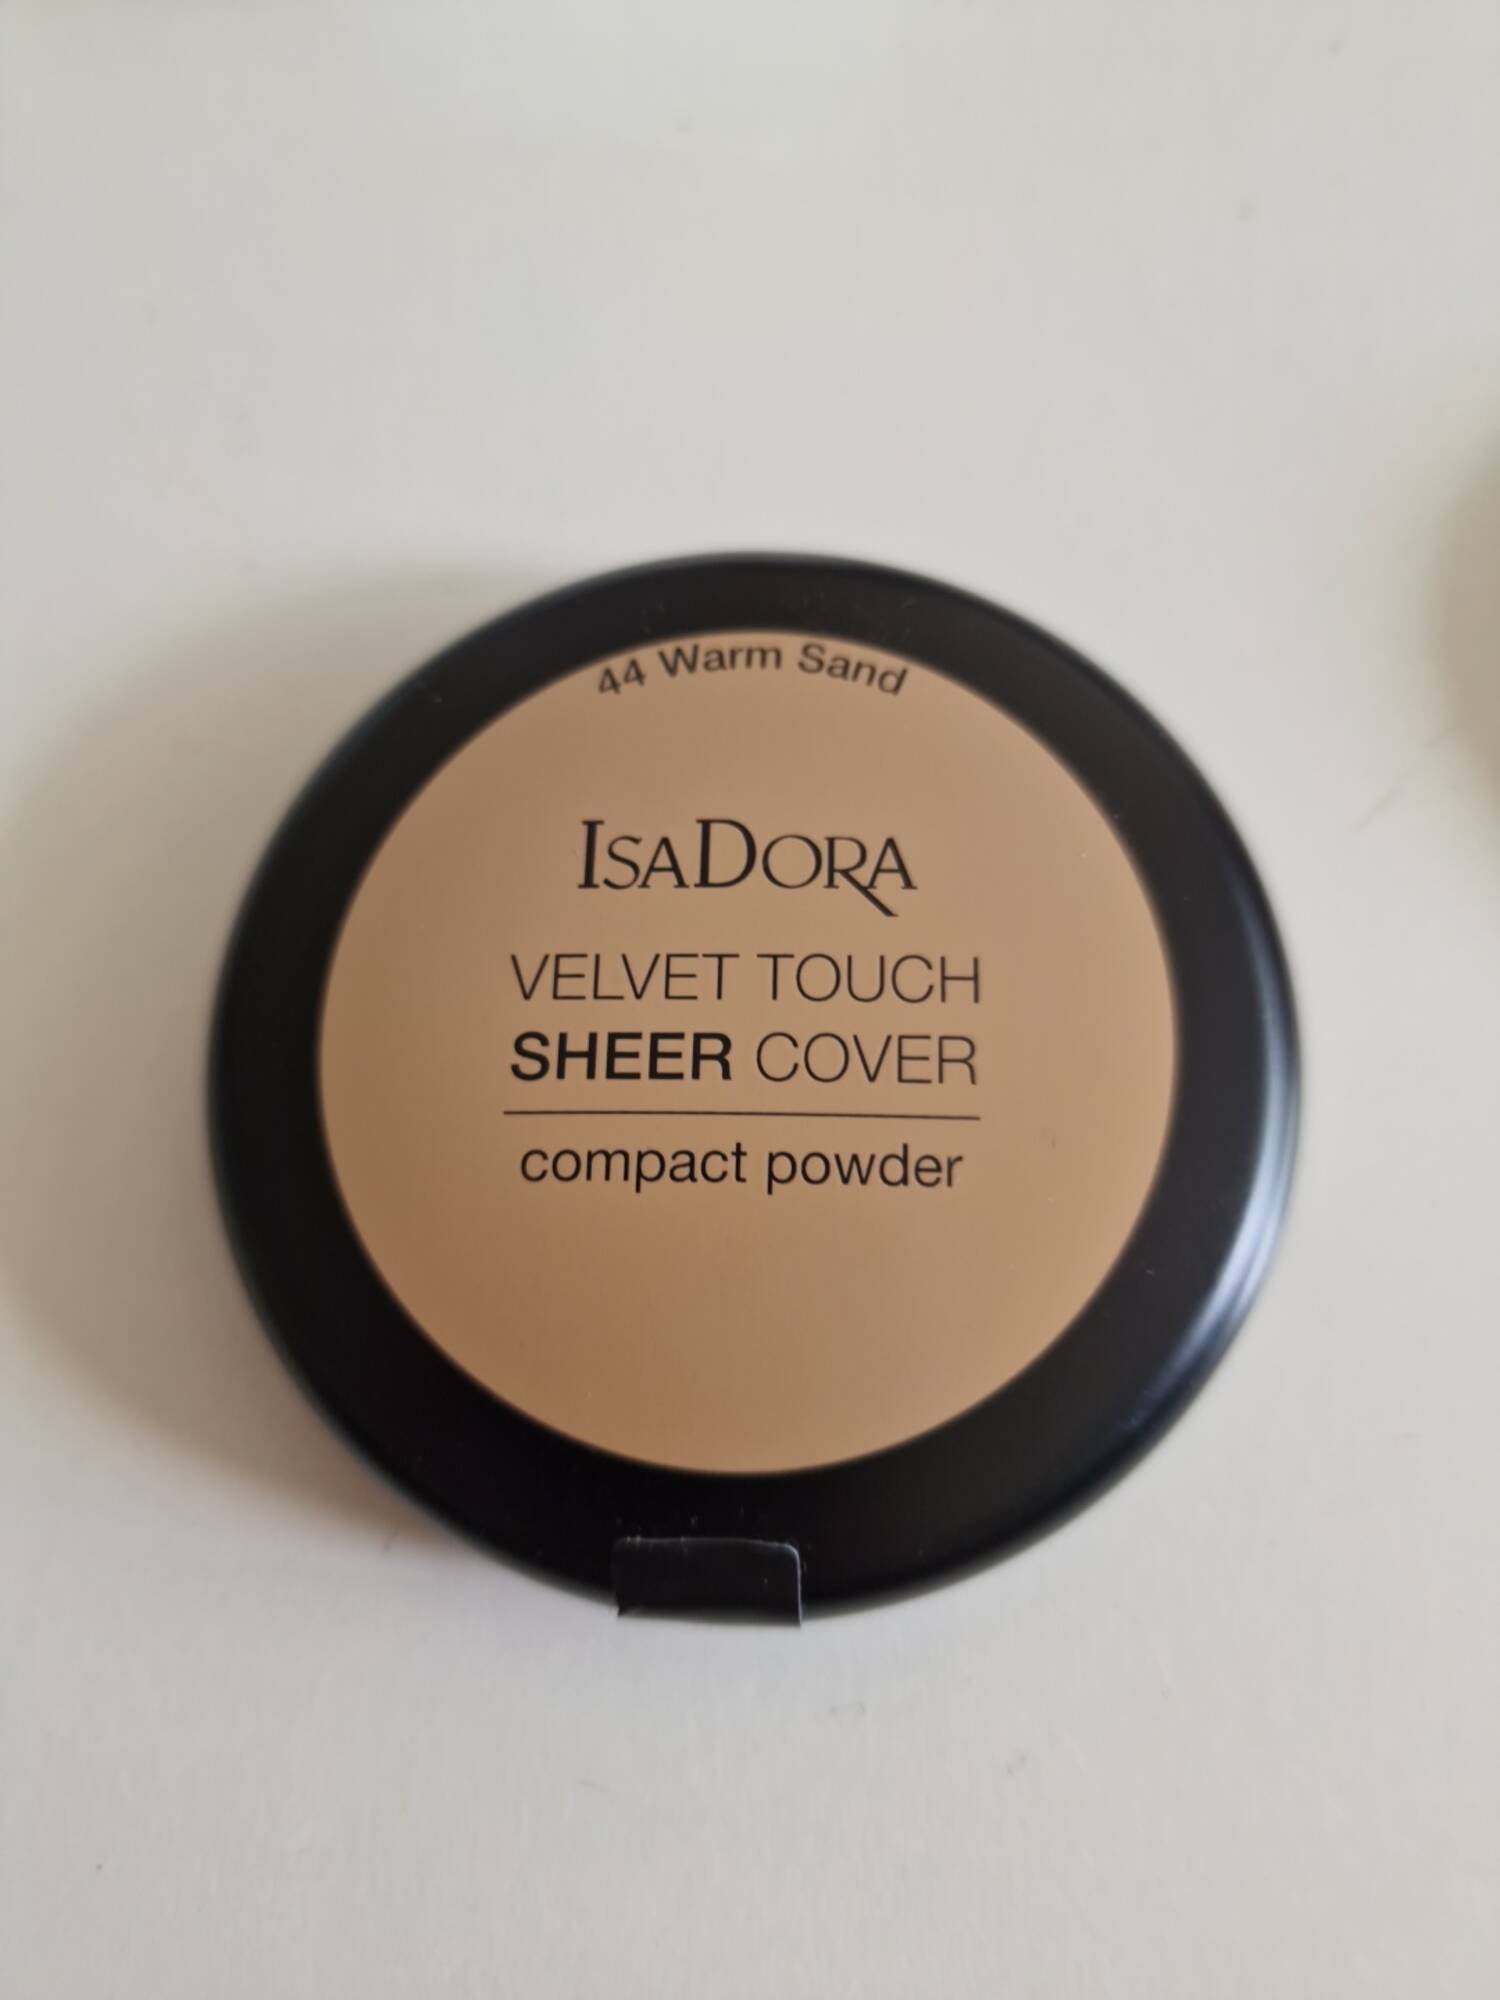 ISADORA - Velvet touch sheer cover - Compact powder 44 warm sand